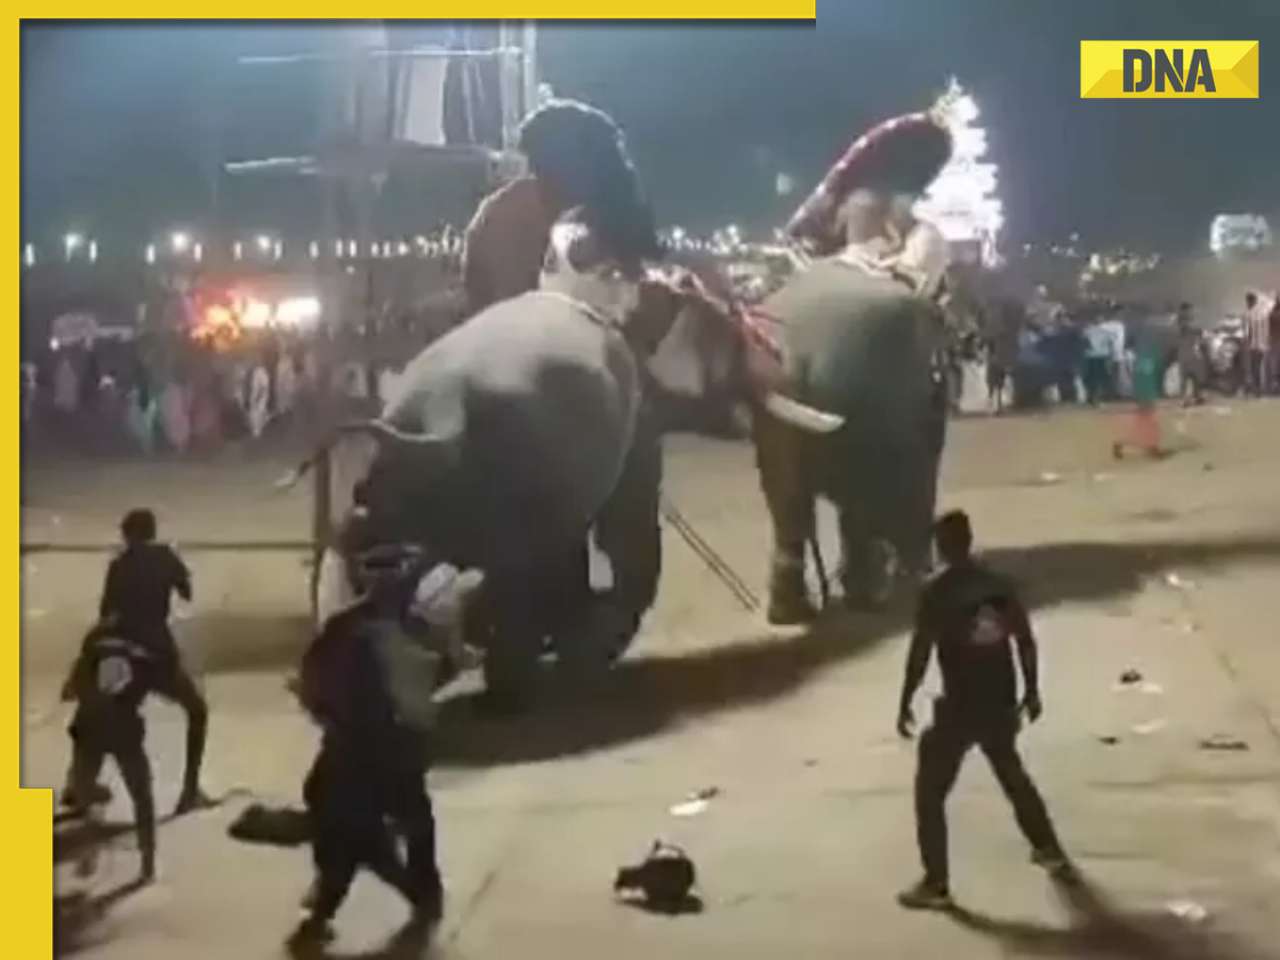 Viral video shows elephant attacking another at packed temple event in Kerala, watch